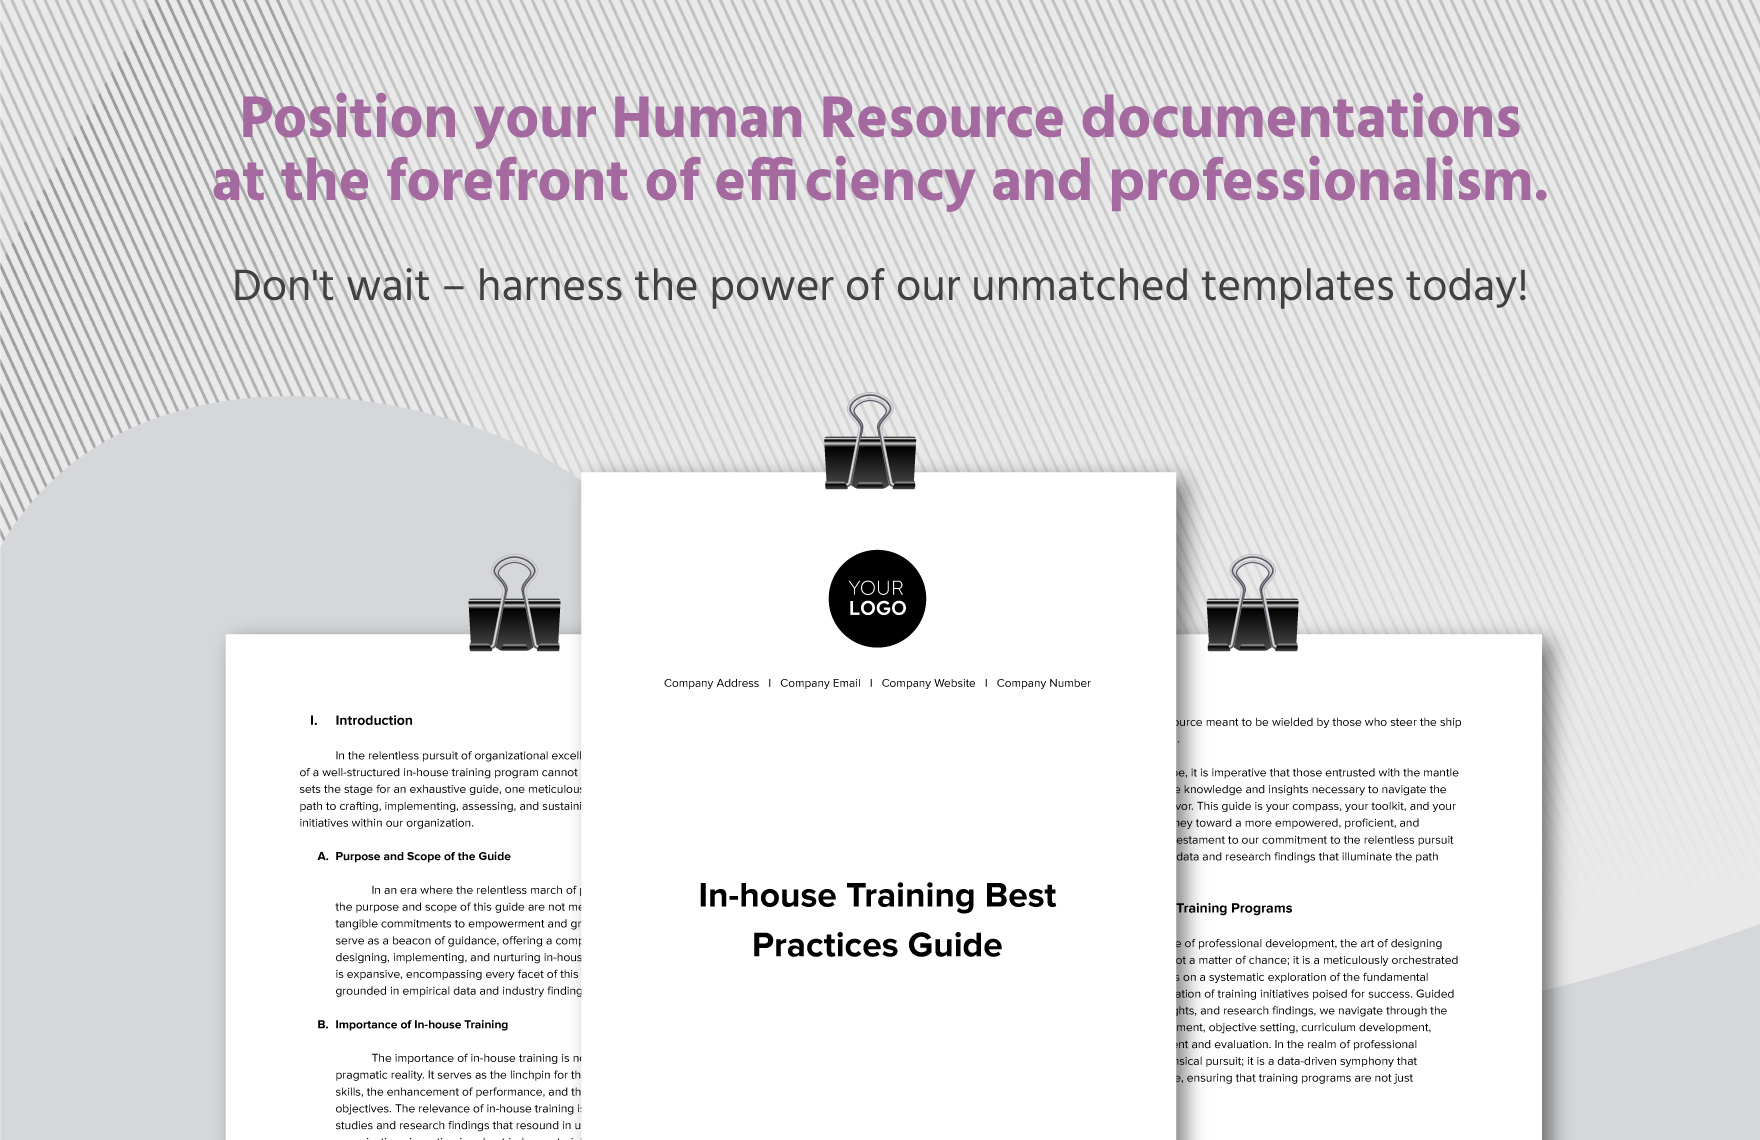 In-house Training Best Practices Guide HR Template